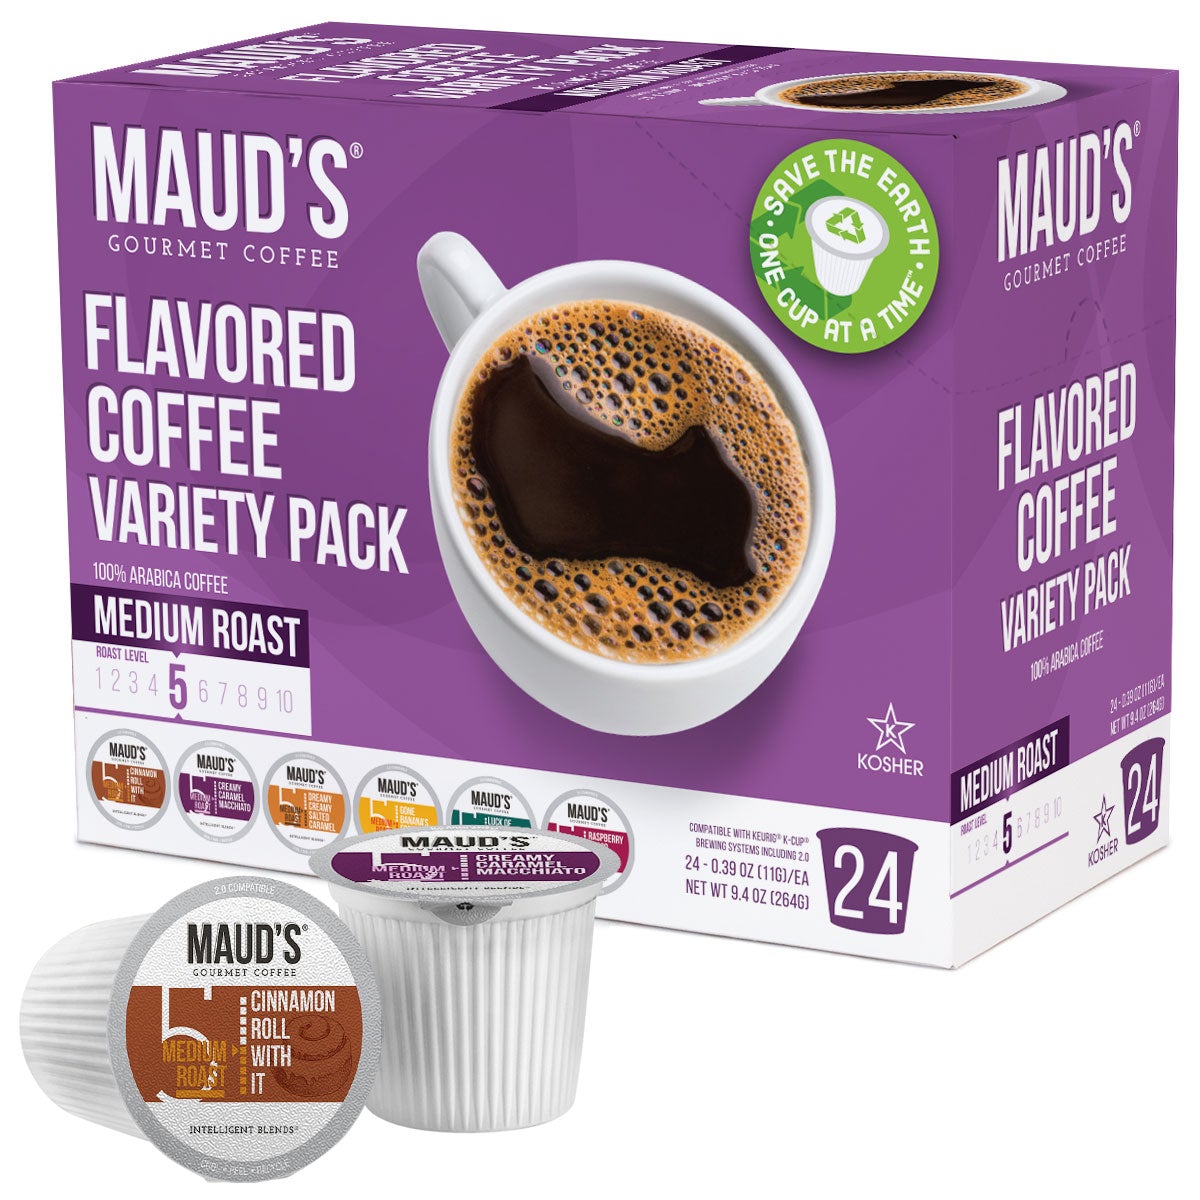 Maud's Flavored Coffee Pods Sampler Variety Pack (6 Flavors) - 24ct